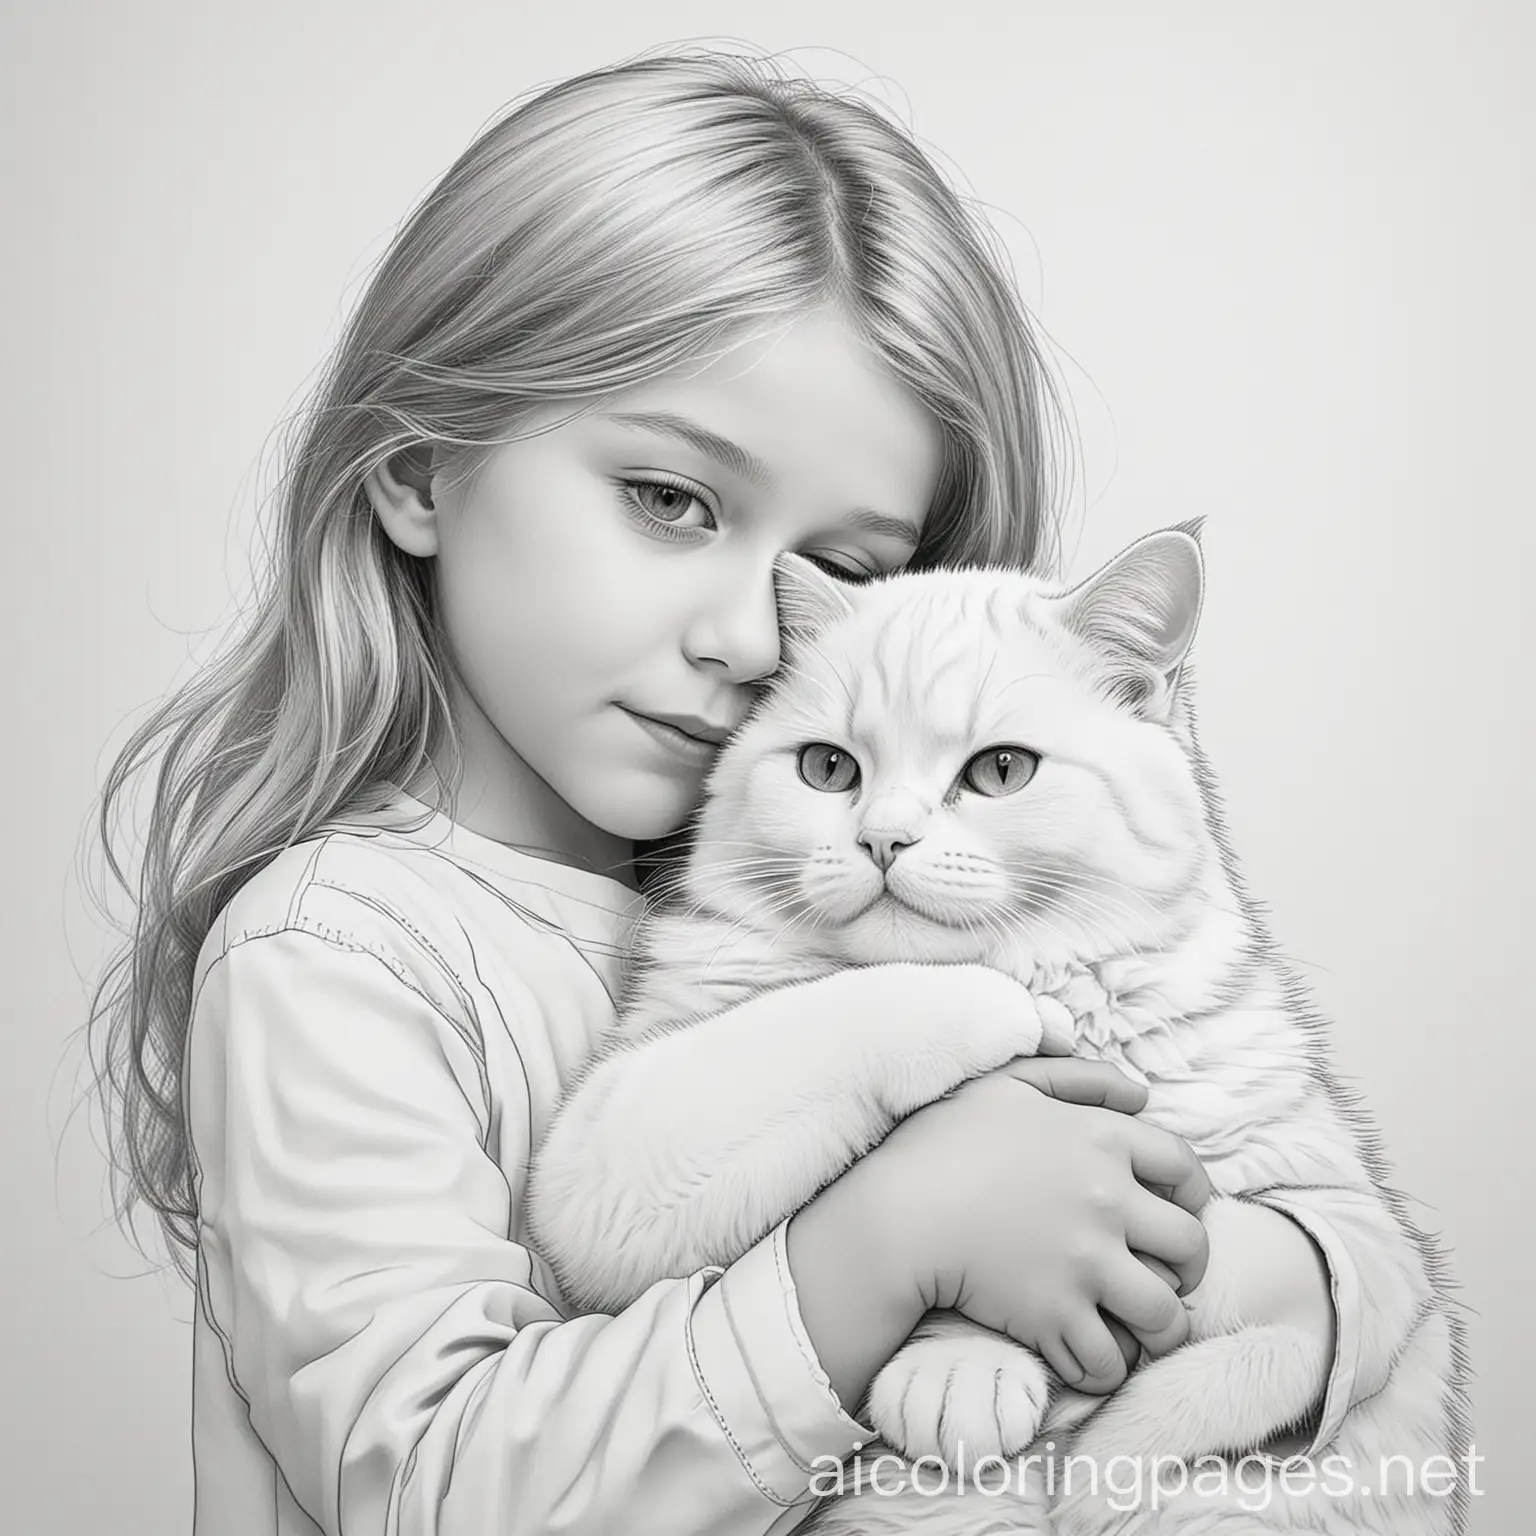 Young Child Cuddling a Fluffy Cat Coloring Page1, Coloring Page, black and white, line art, white background, Simplicity, Ample White Space. The background of the coloring page is plain white to make it easy for young children to color within the lines. The outlines of all the subjects are easy to distinguish, making it simple for kids to color without too much difficulty